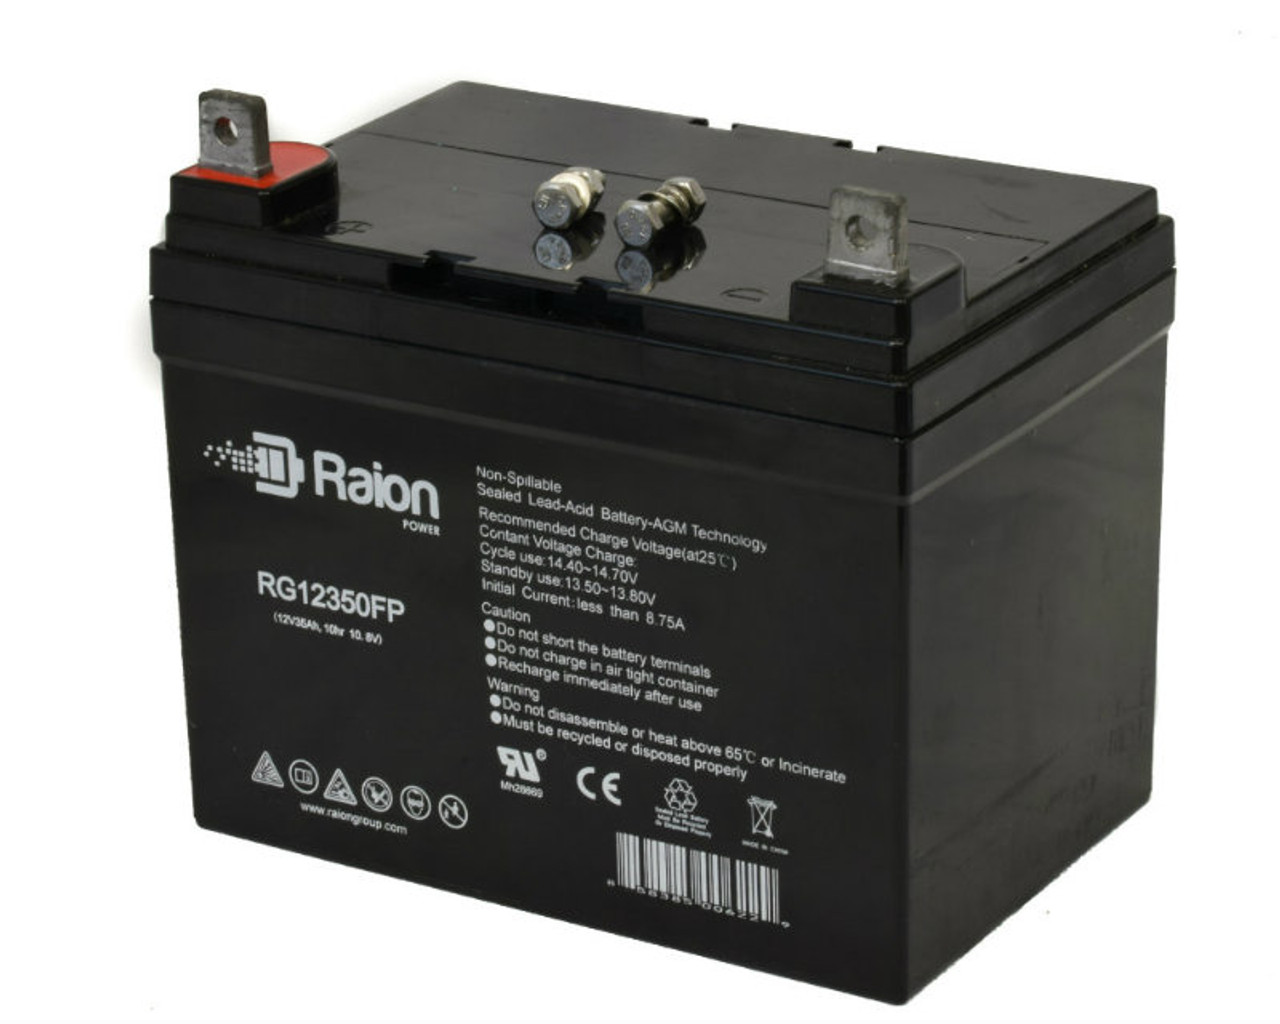 Raion Power Replacement 12V 35Ah RG12350FP Battery for Case International 644